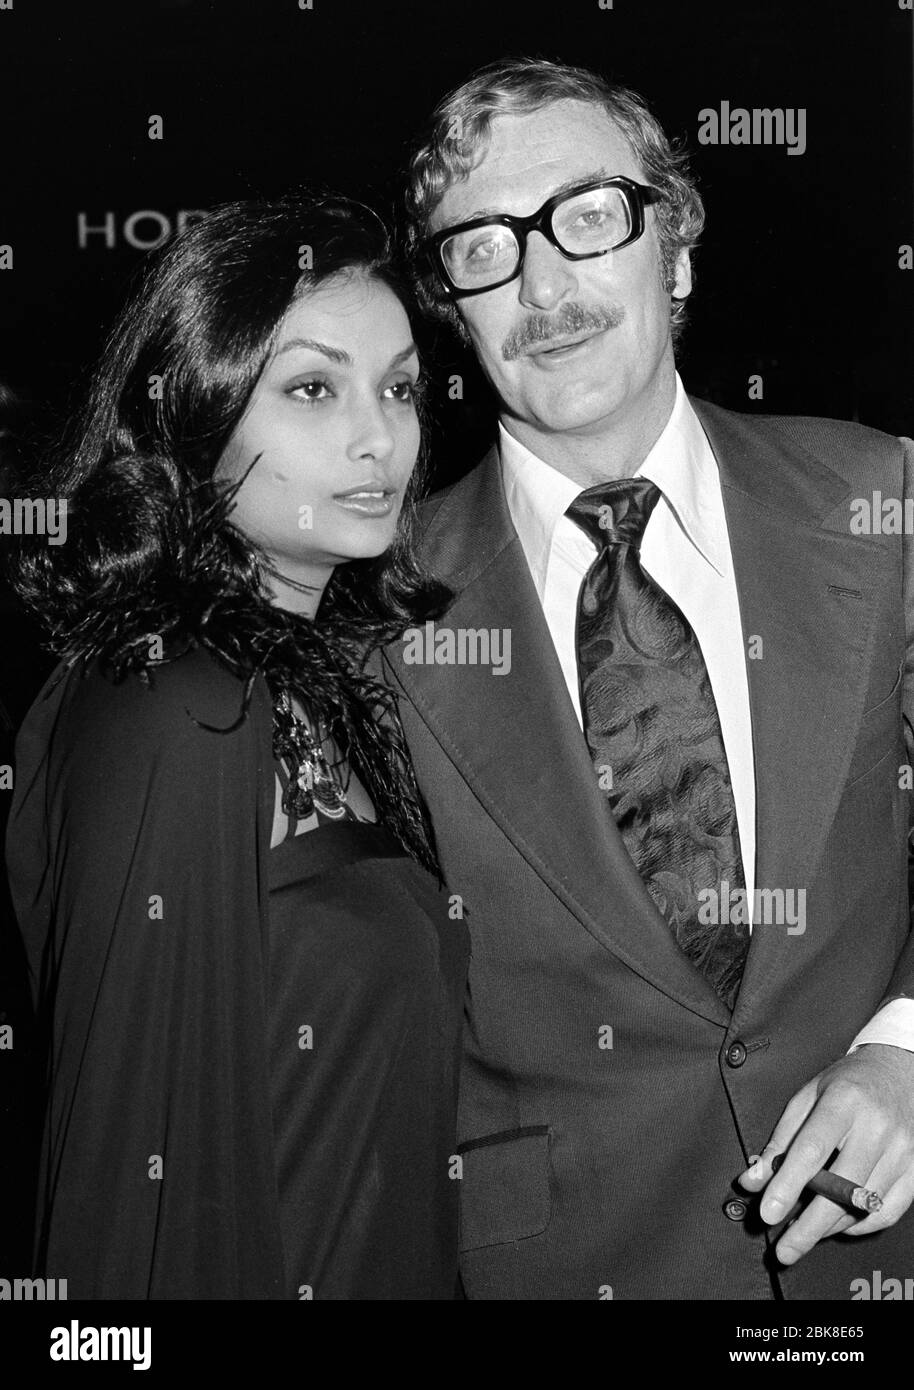 LONDON, UK. October 1974: Actor Michael Caine & wife Shakira Caine at the premiere of 'That's Entertainment' in London.  File photo © Paul Smith/Featureflash Stock Photo